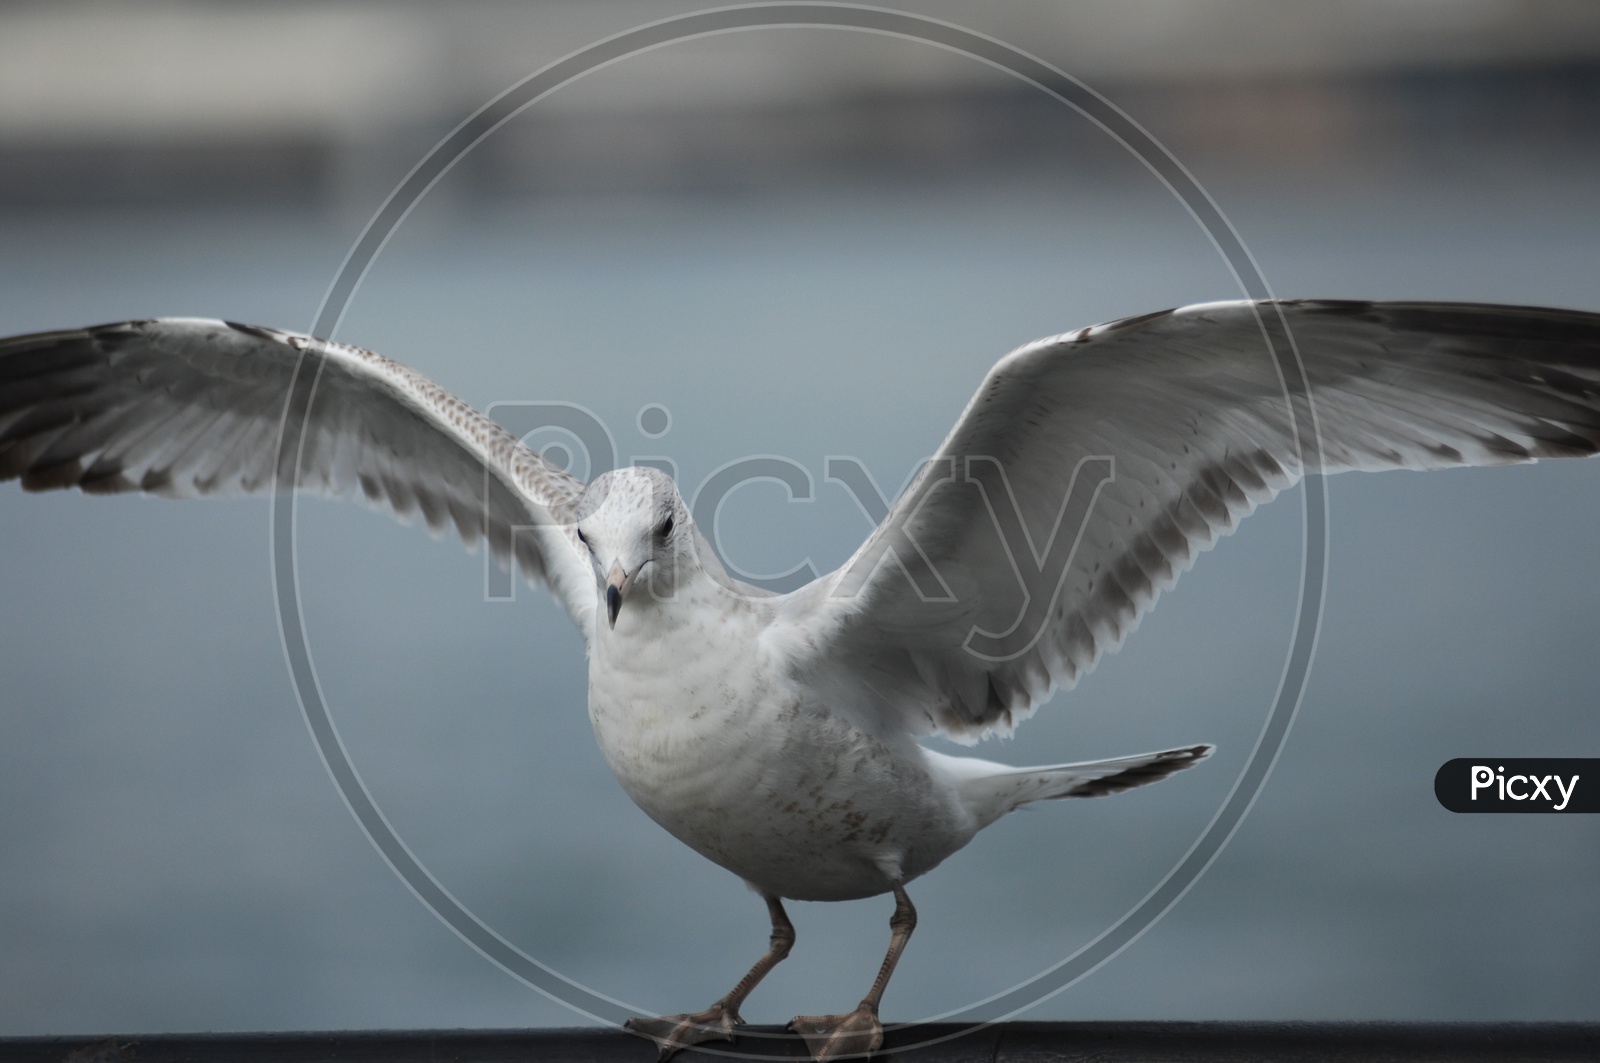 A Laughing Gull with its wings widespread